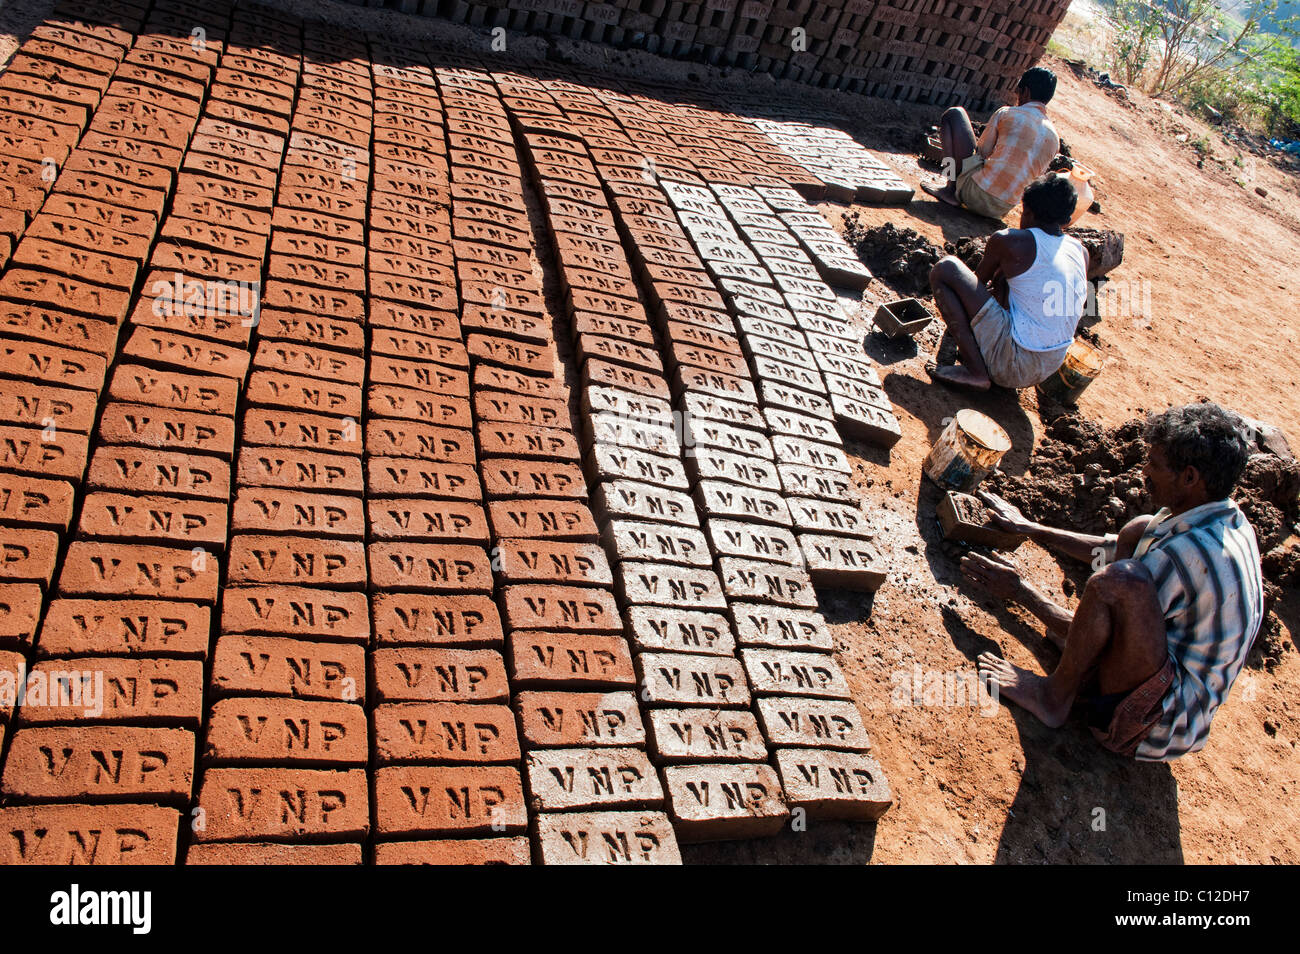 Indian men making house bricks by hand using a mould and wet clay / mud. Drying them in the sun before firing them hard. Andhra Pradesh, India Stock Photo